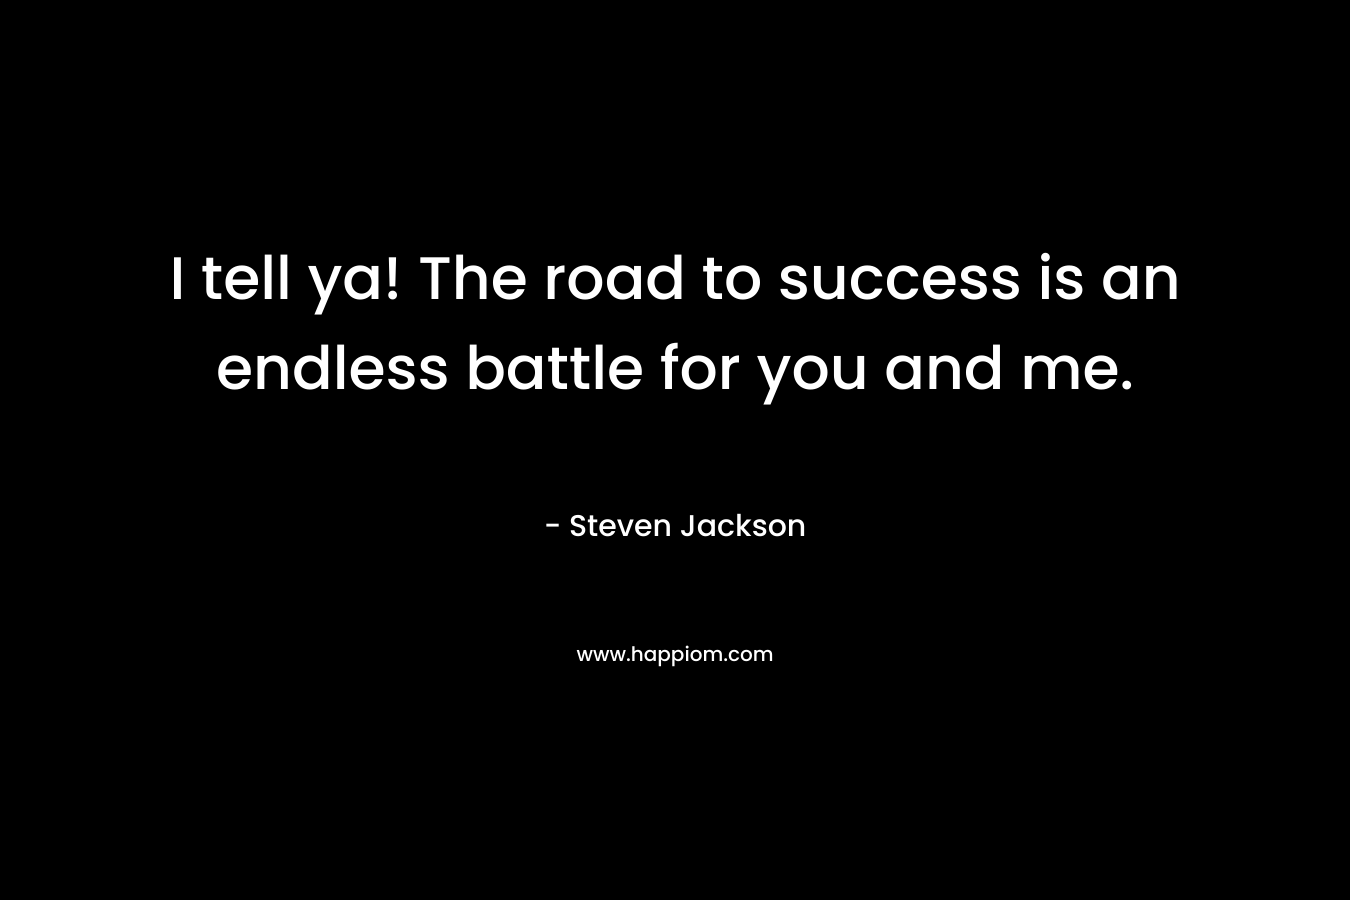 I tell ya! The road to success is an endless battle for you and me. – Steven Jackson